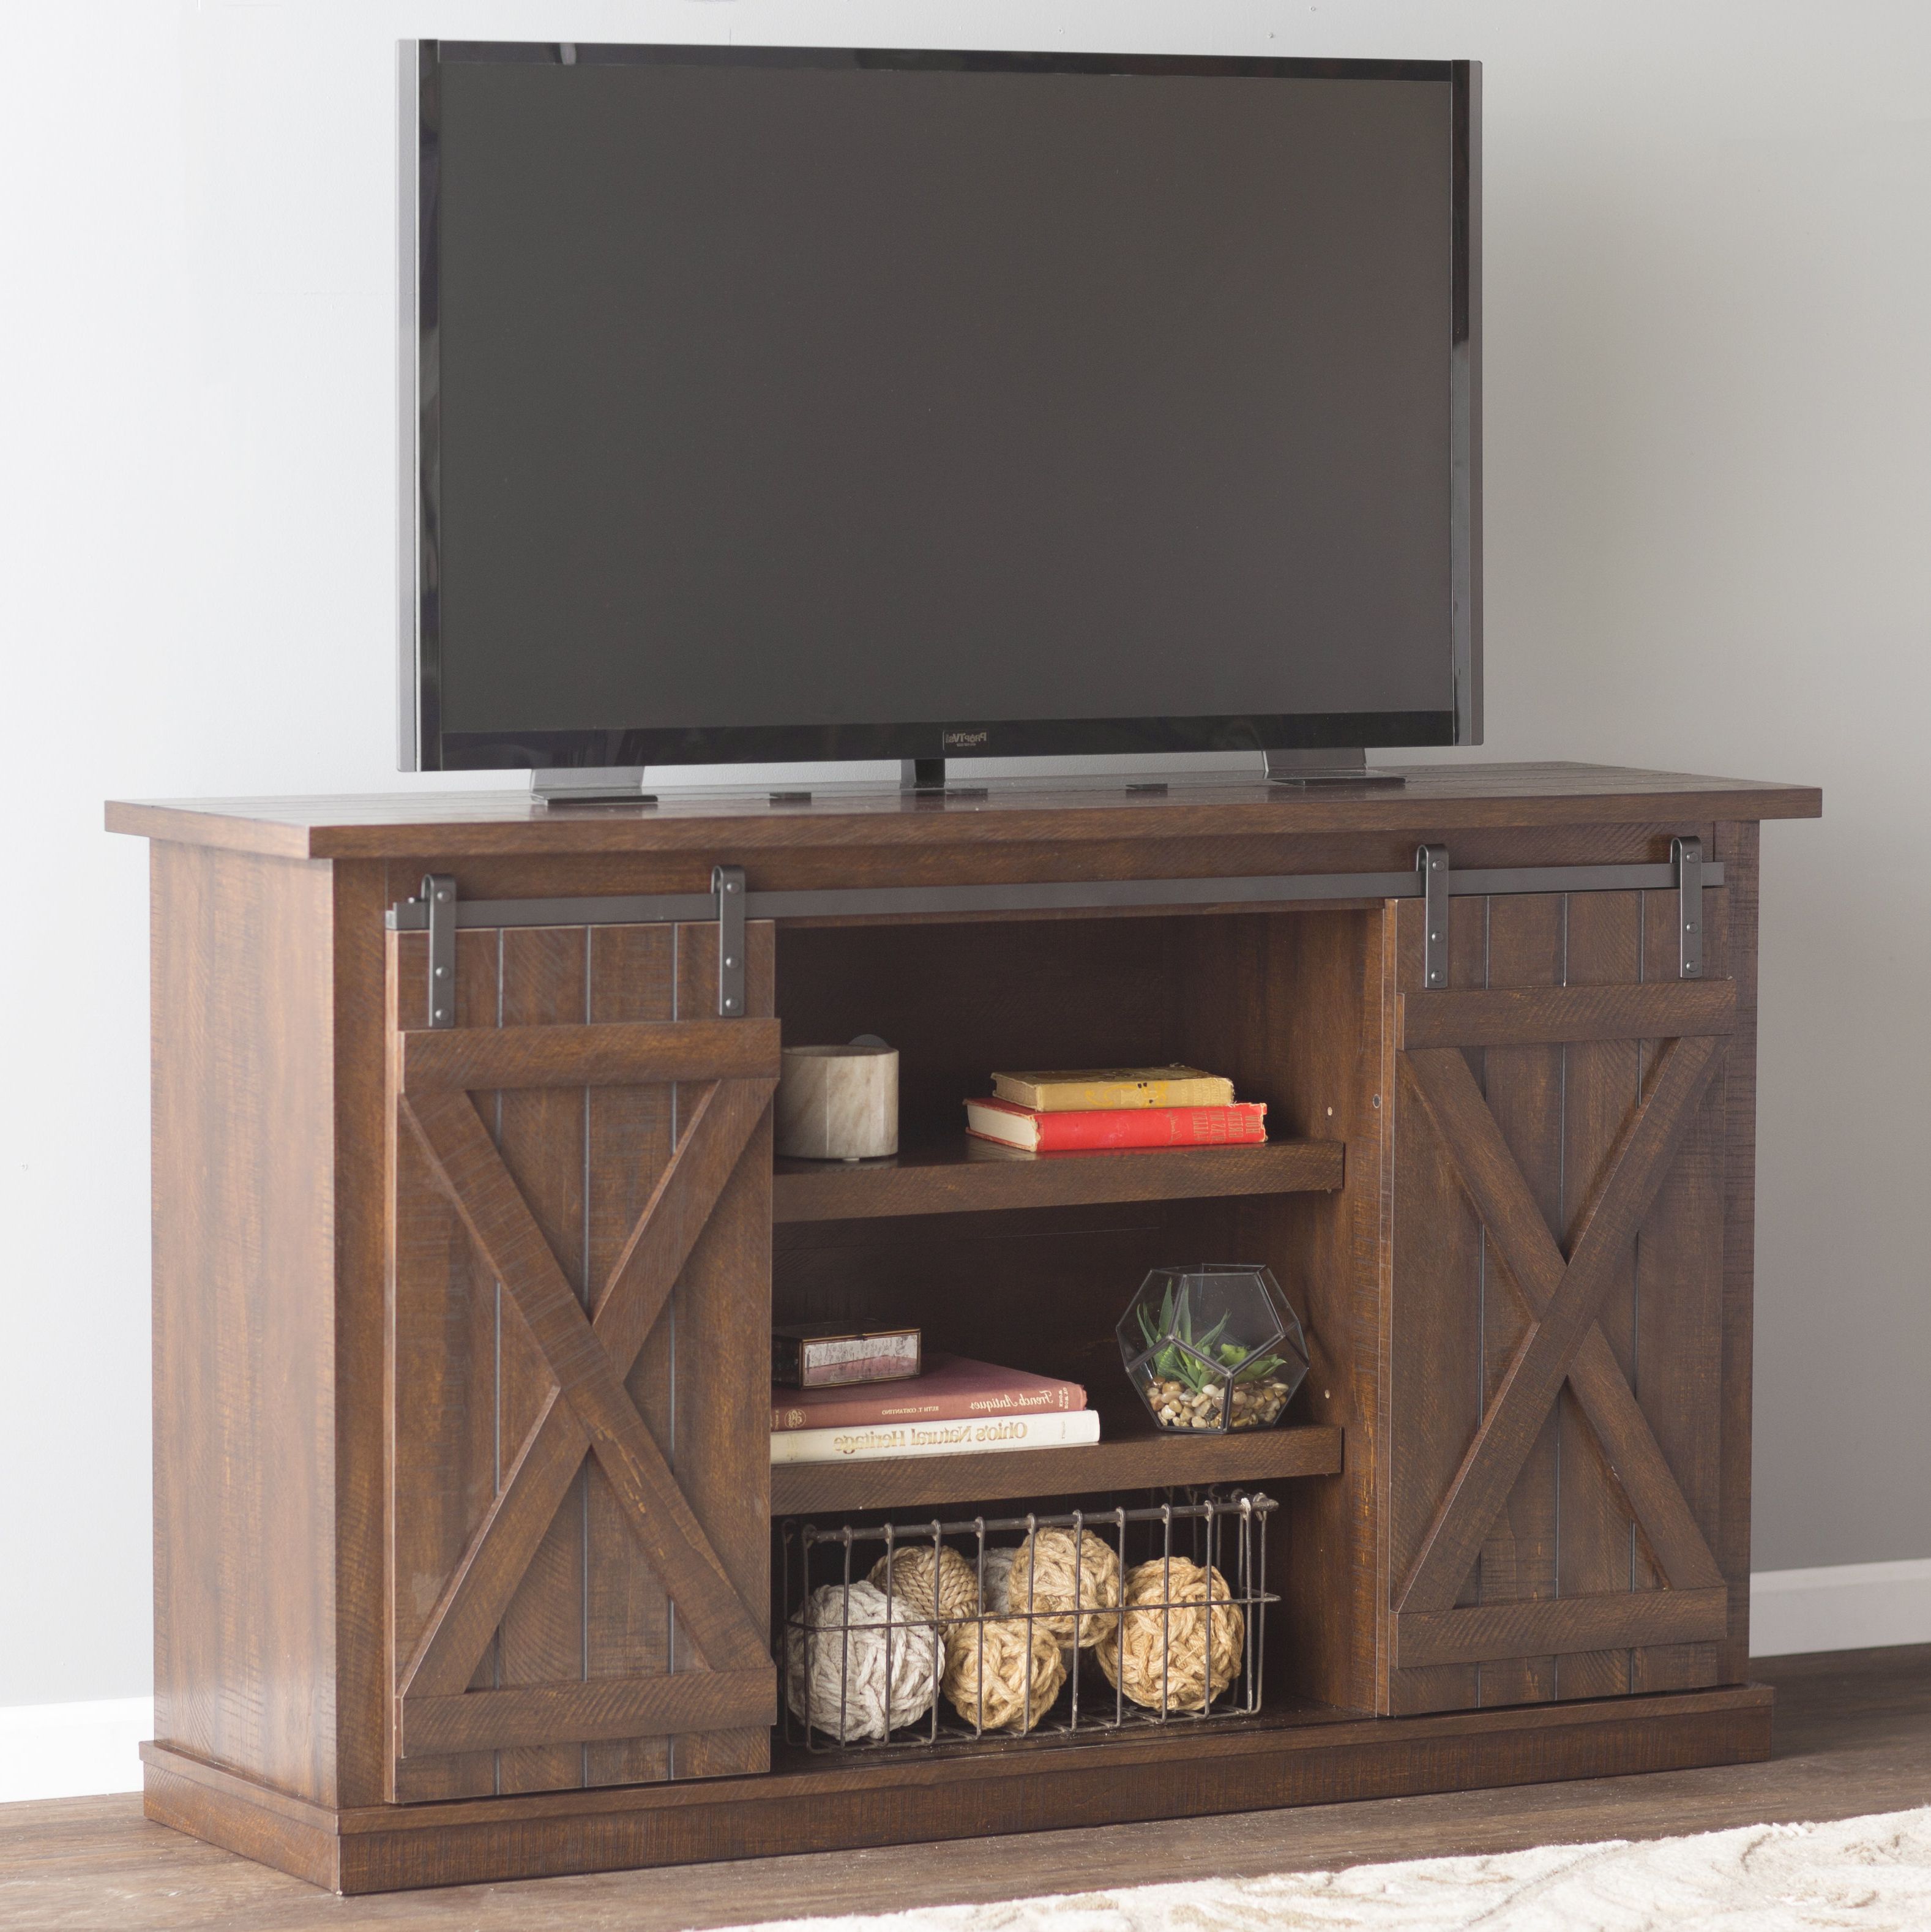 Most Recent Tv Stands & Entertainment Centers You'll Love With Tv Cabinets With Storage (View 1 of 20)